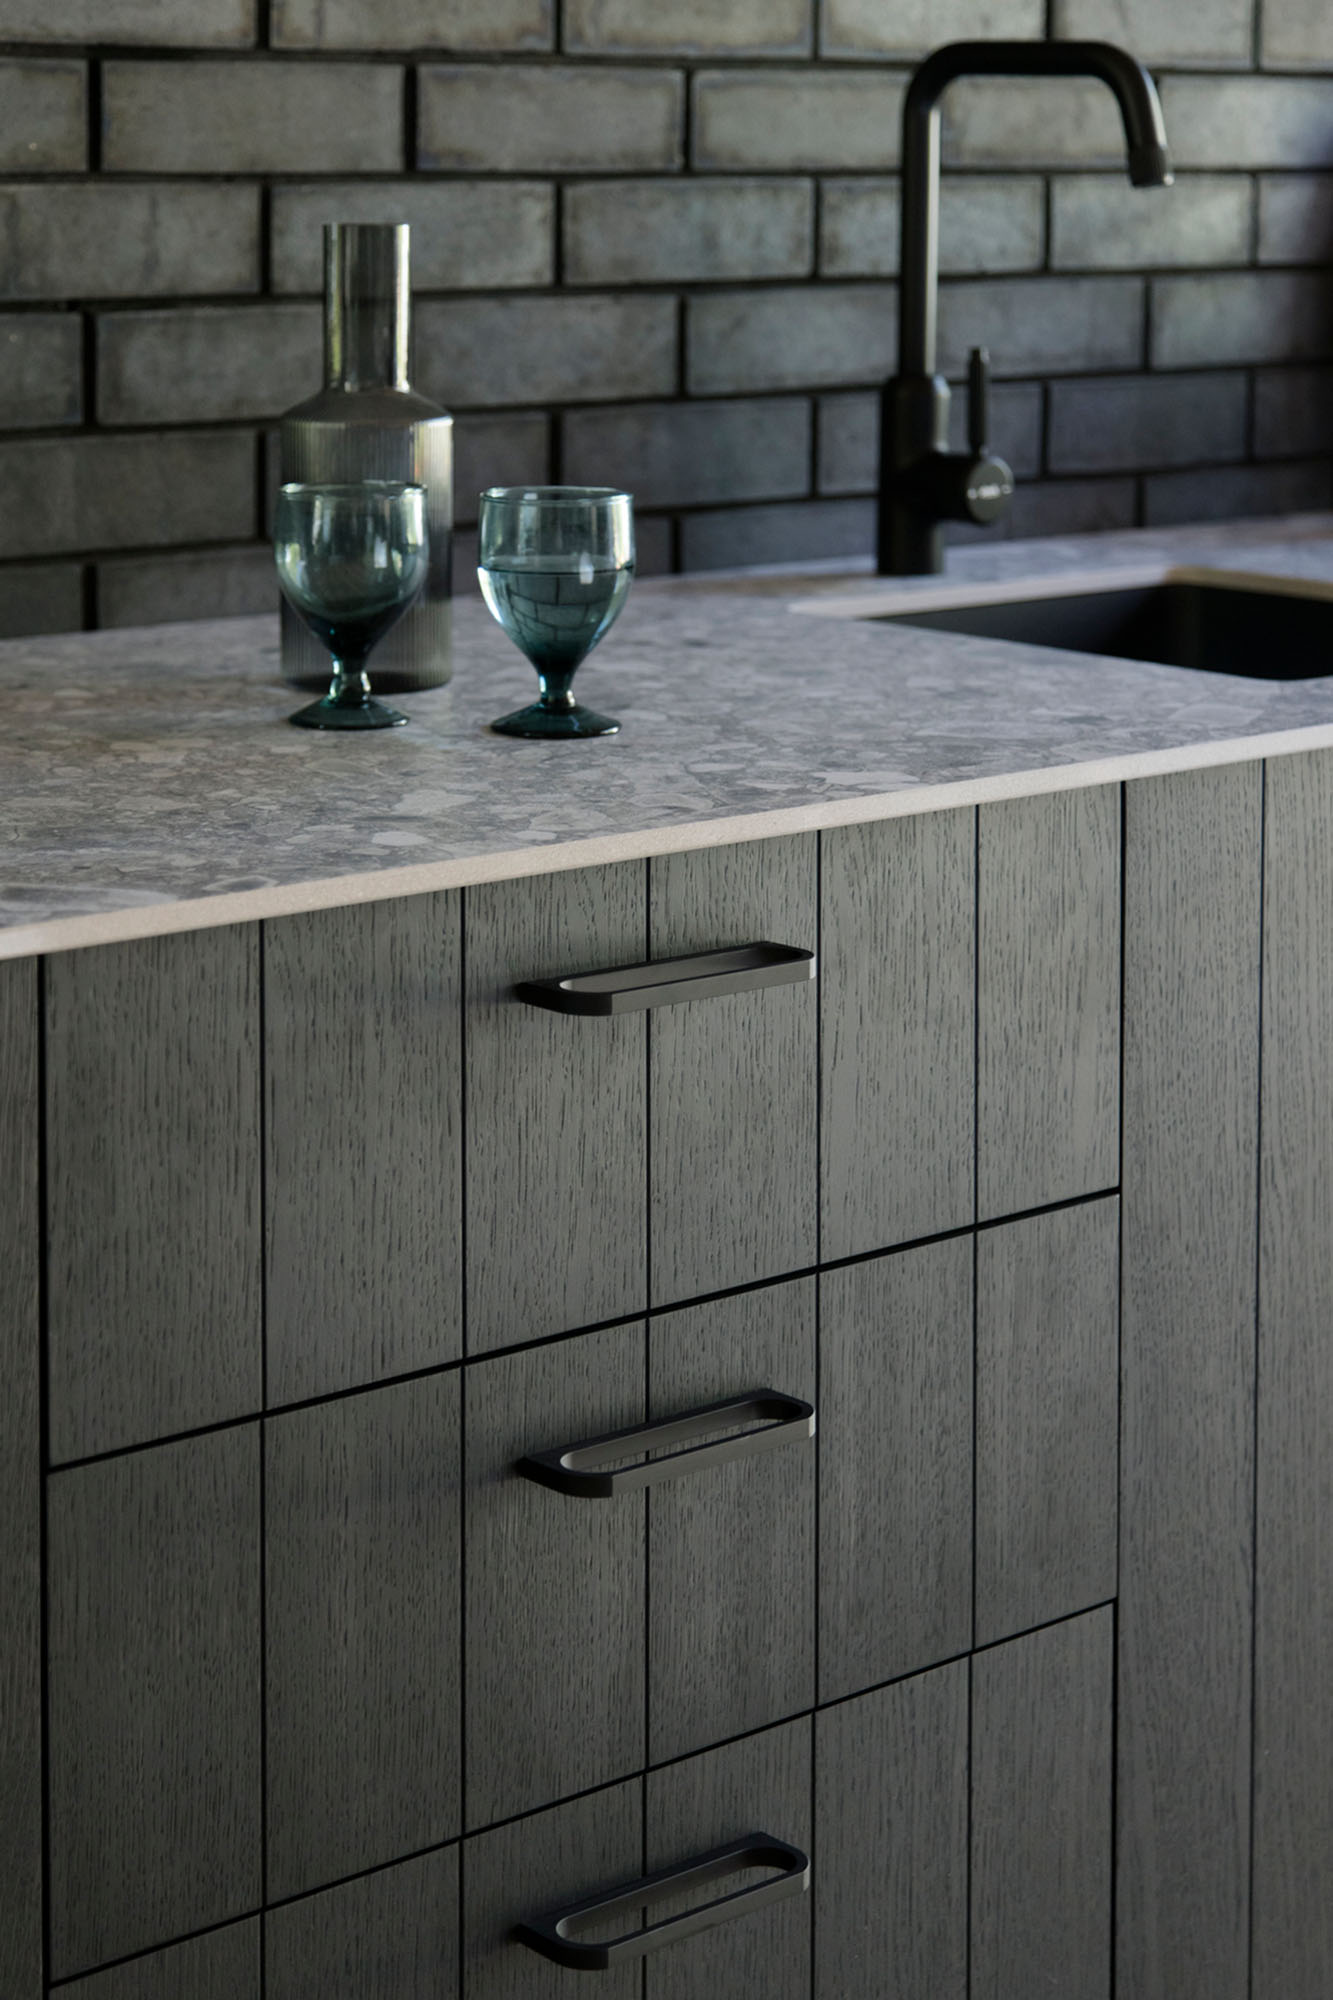 Husk's Smoked Oak Kitchen, featuring Smoked Oak V-Groove kitchen fronts.